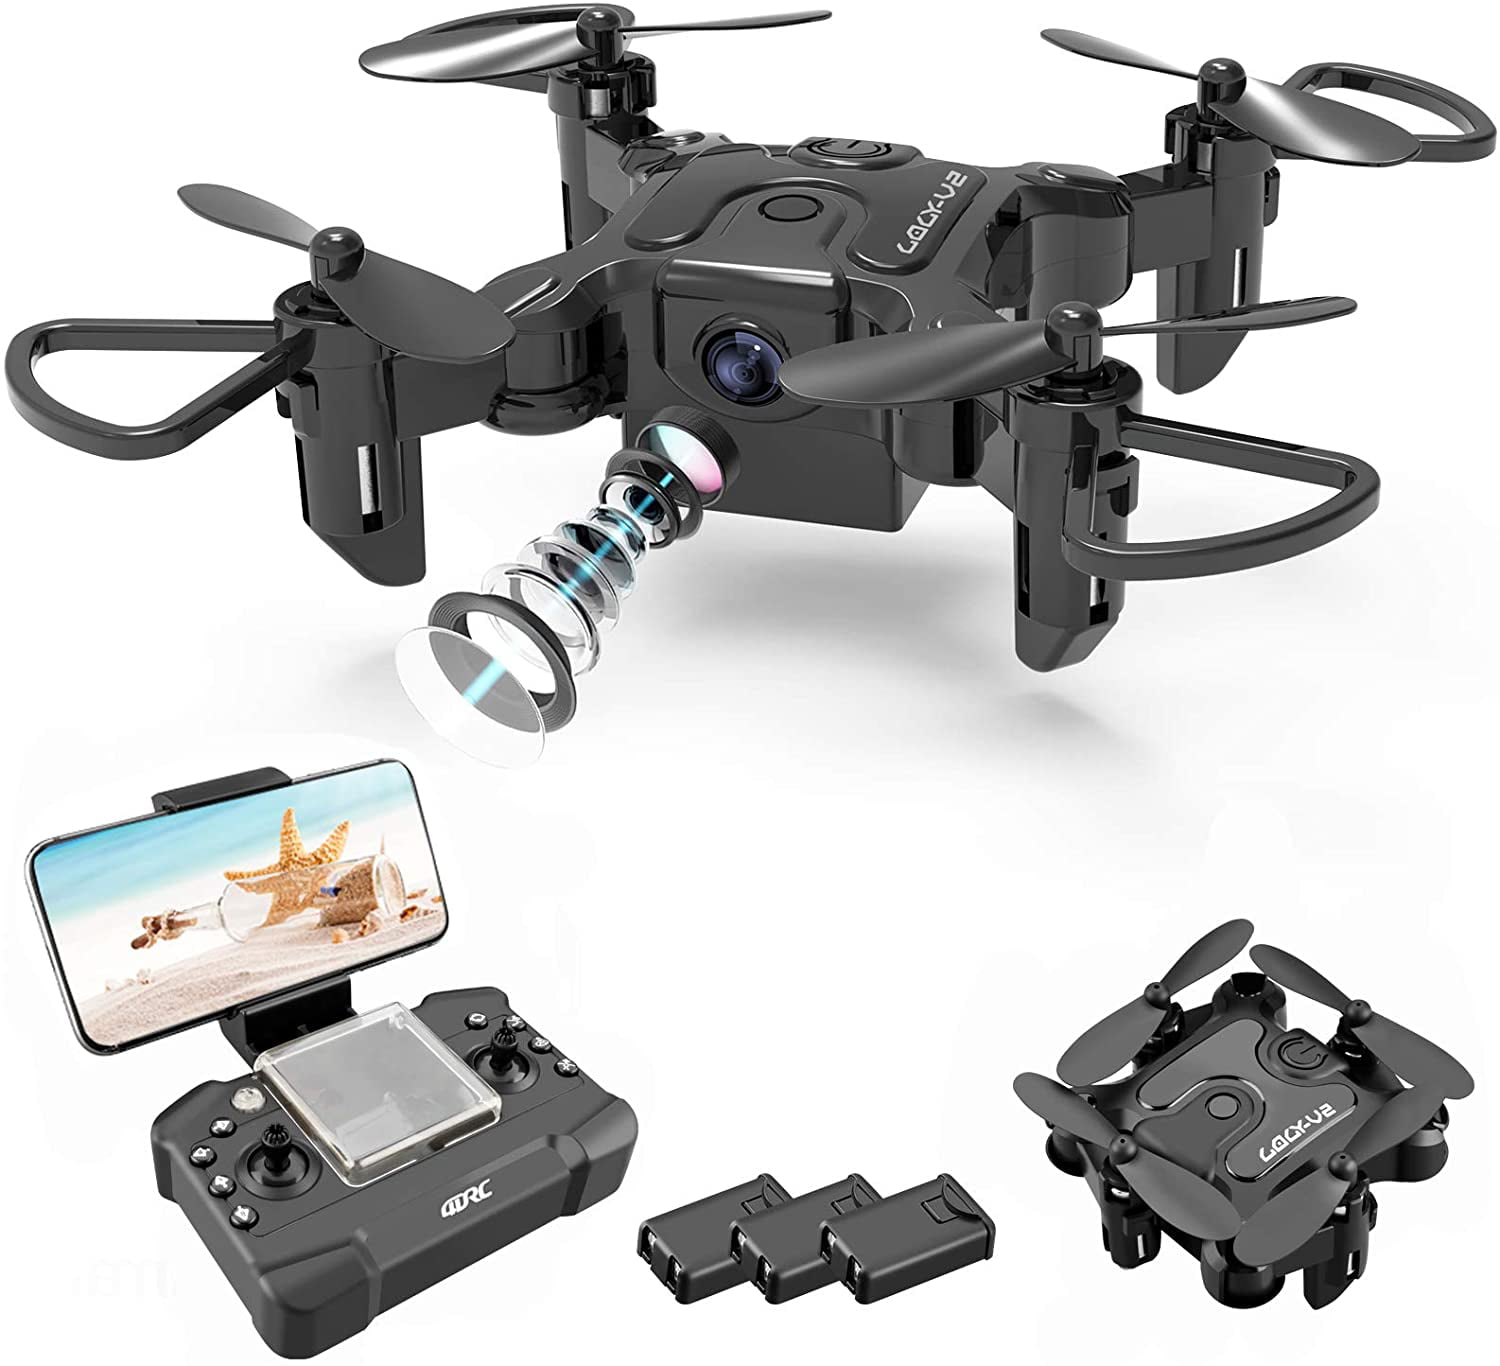 Details about   S6 MINI FOLDABLE POCKET DRONE BY SKYDRONES 2X BATTERIES 4X4X2' HD/CAMERA   APP**